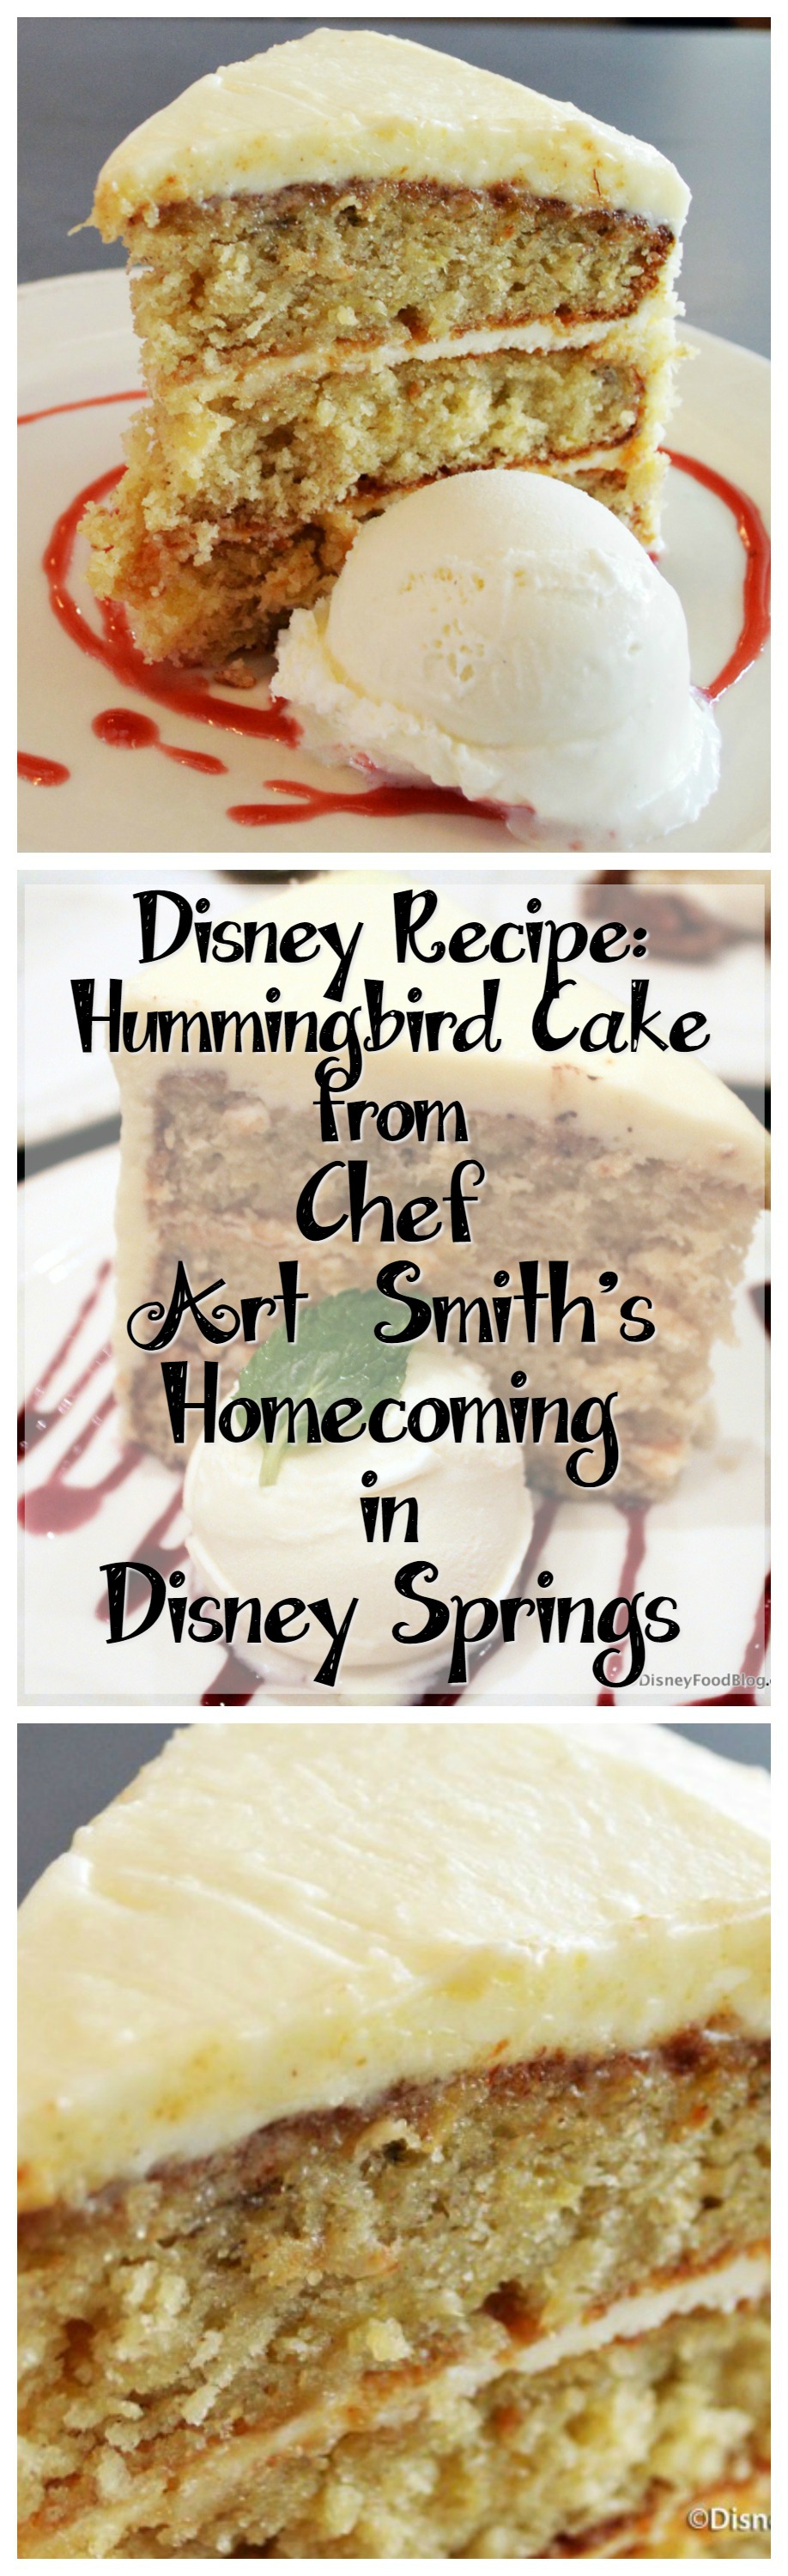 Disney Recipe for Hummingbird Cake from Chef Art Smith’s Homecoming in Disney Springs